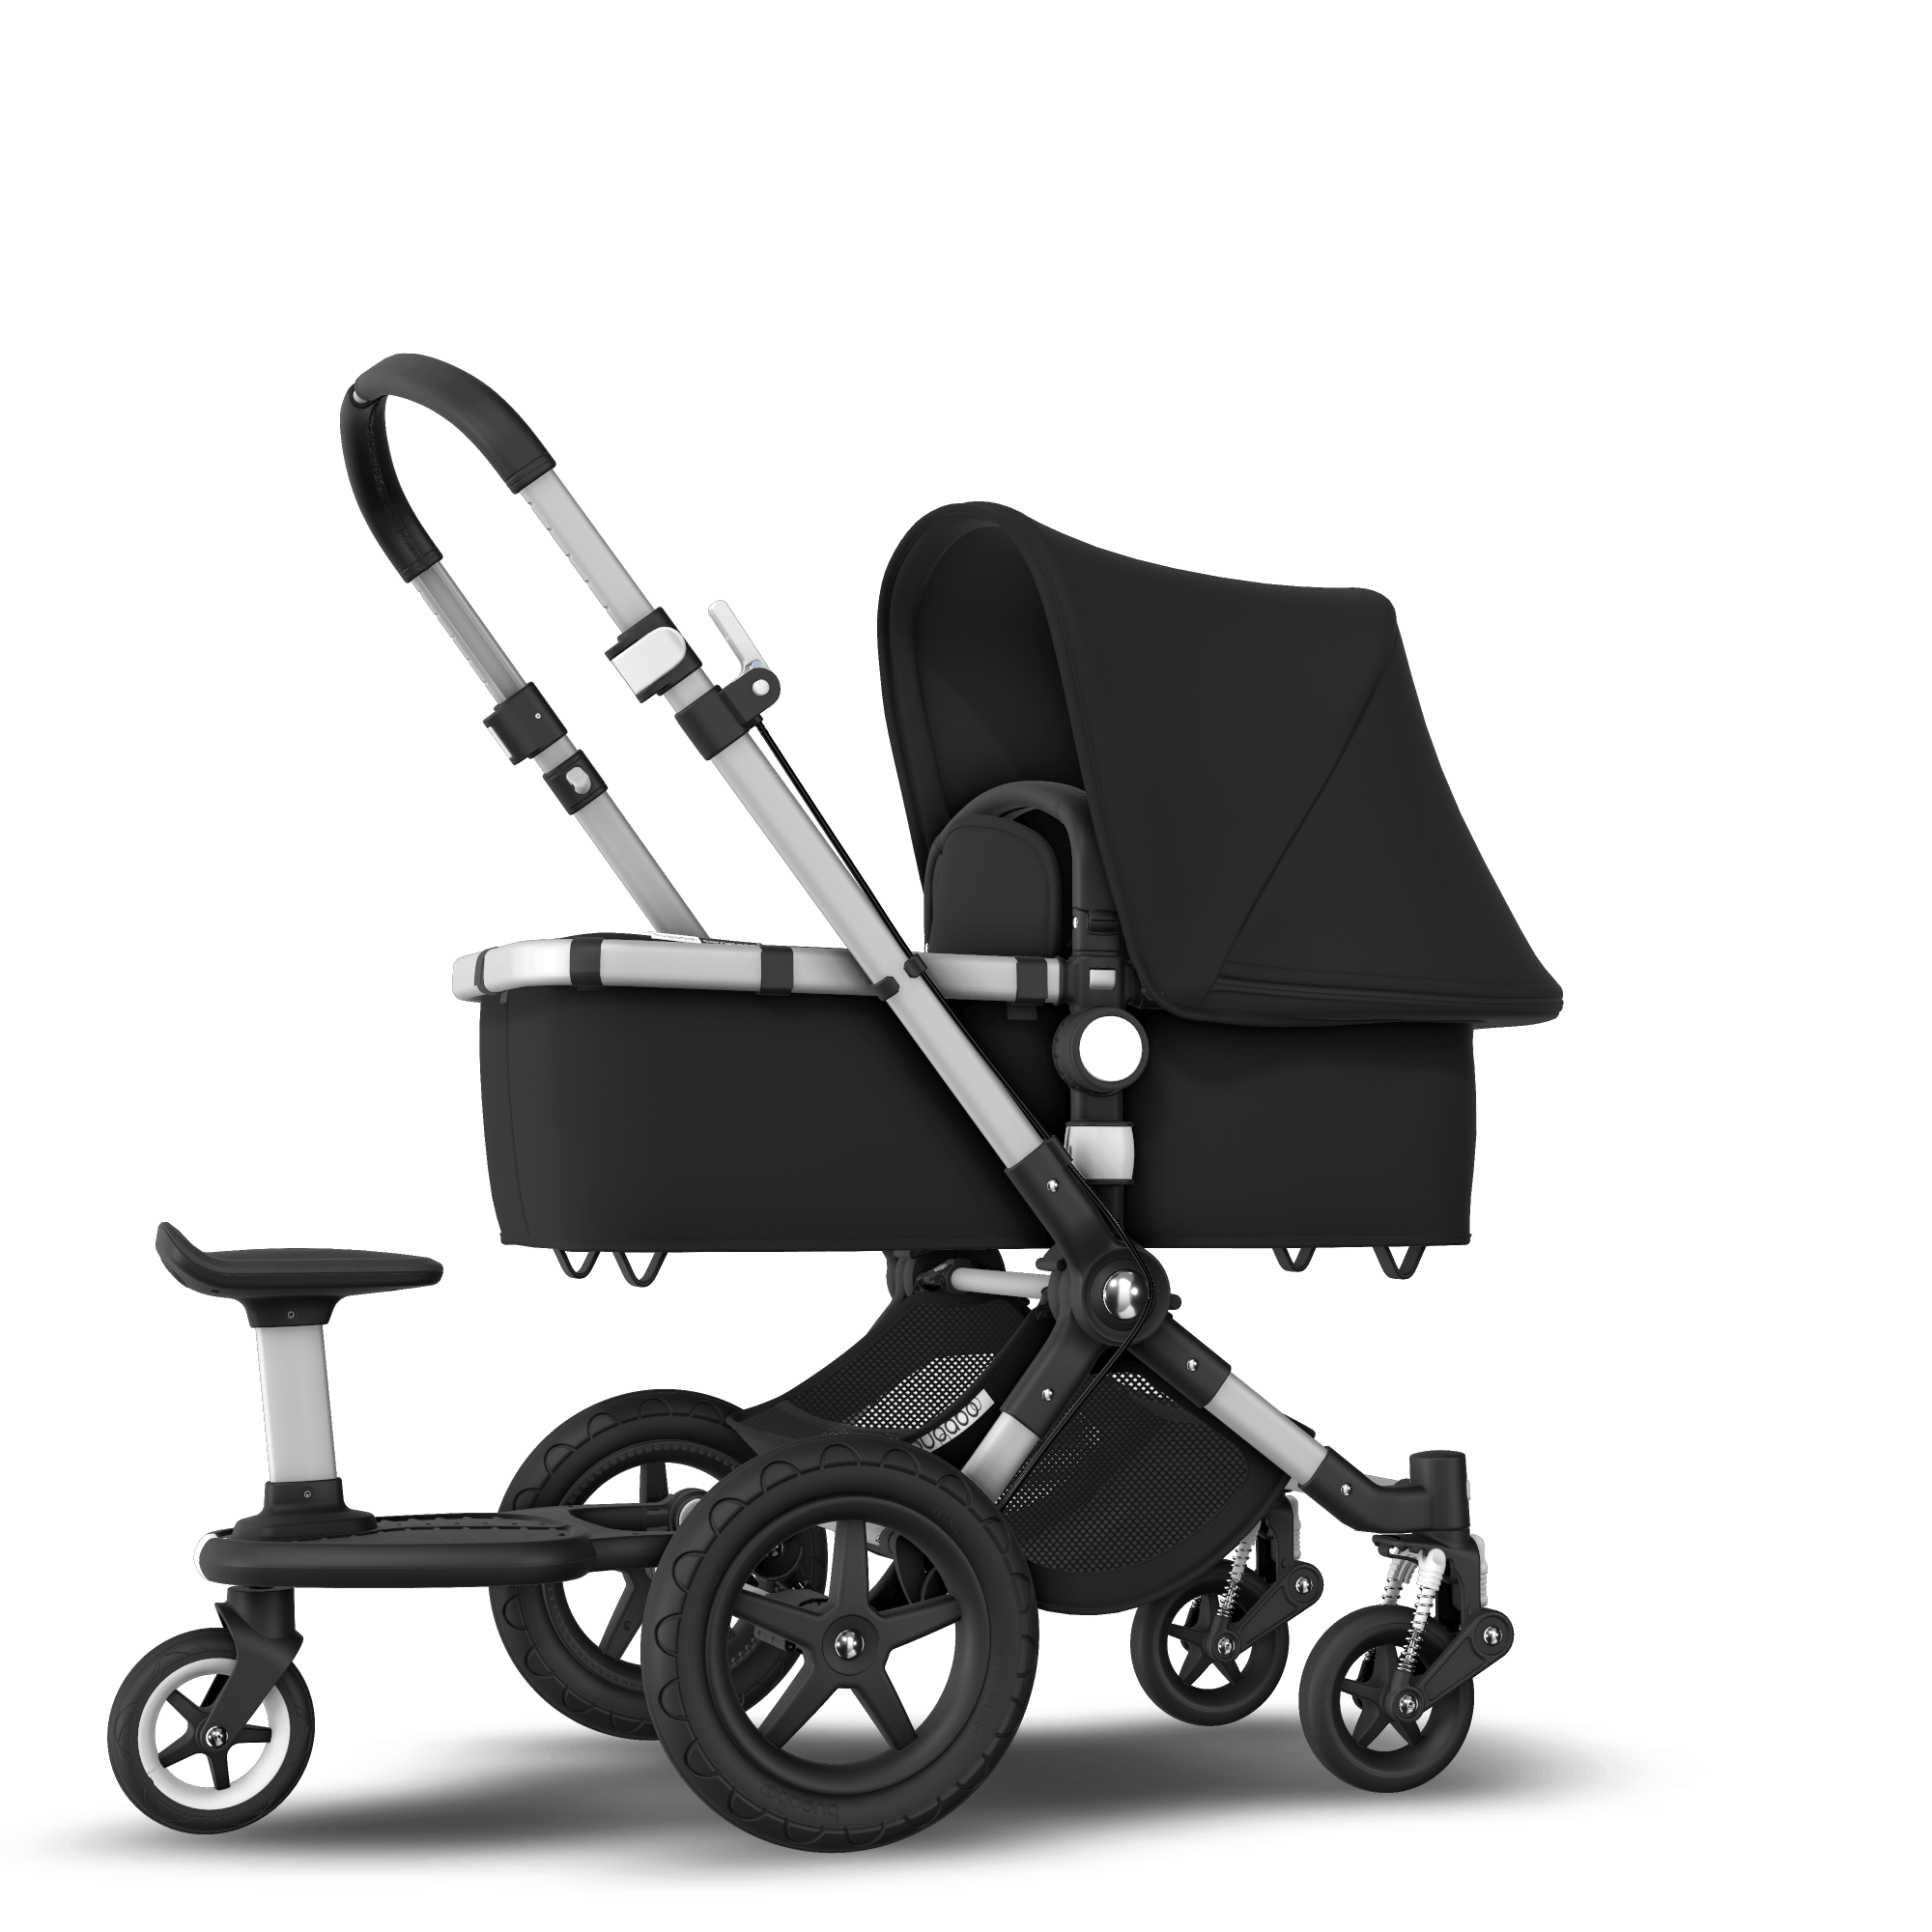 Bugaboo Beauty: the Bugaboo Cameleon 3 Elements Special Edition